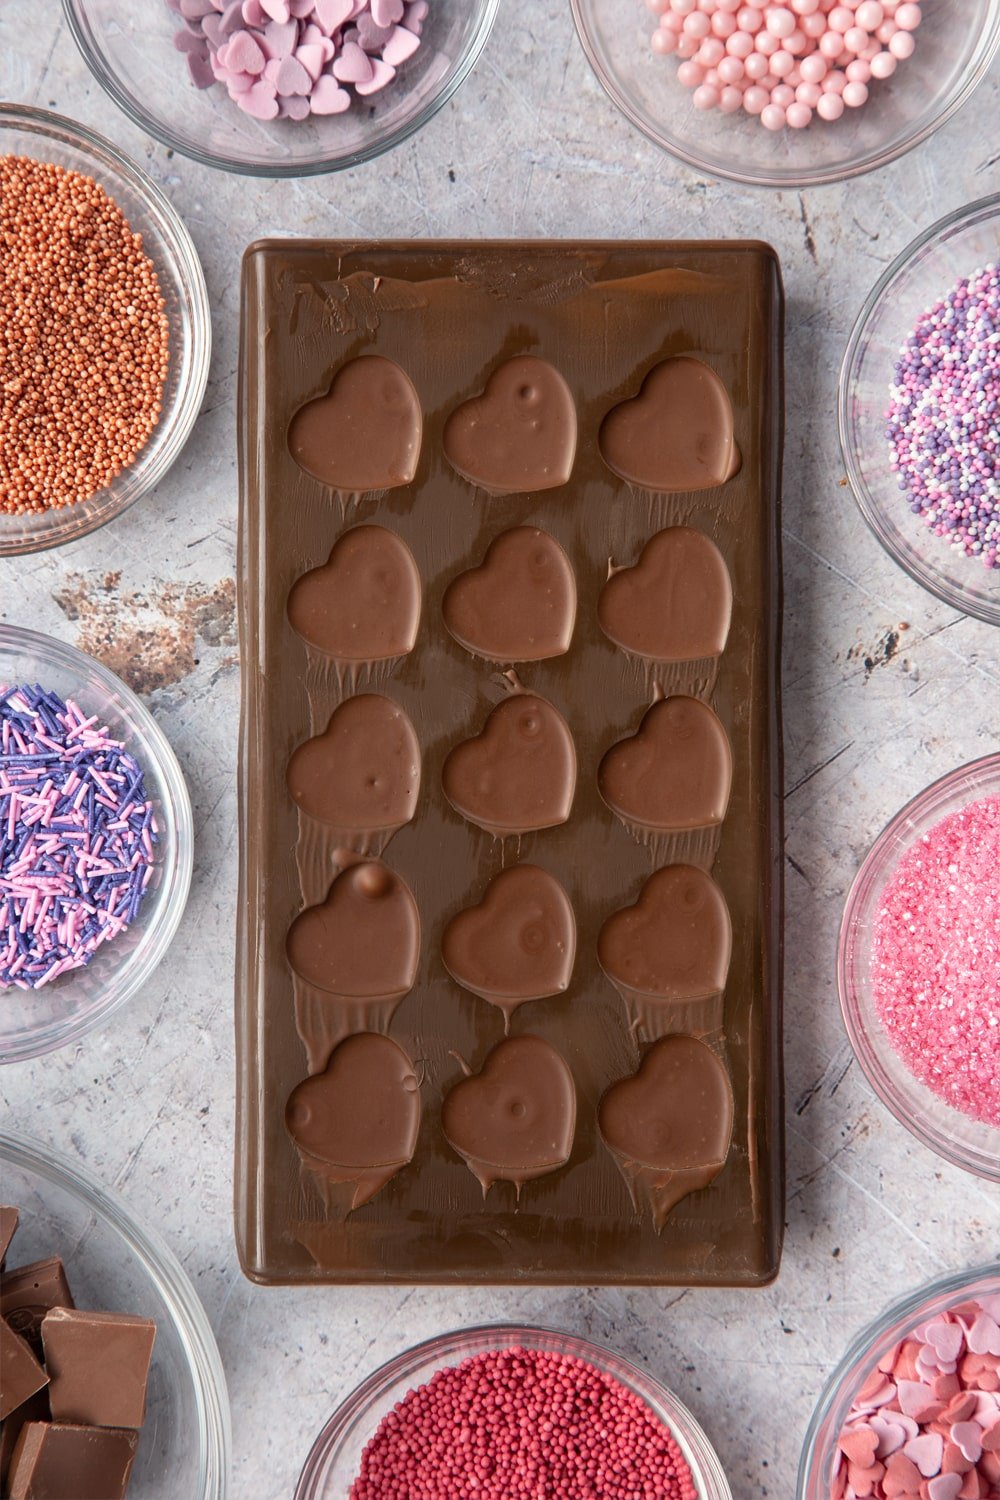 Overhead shot of chocolate in brown Heart-shaped candy mould